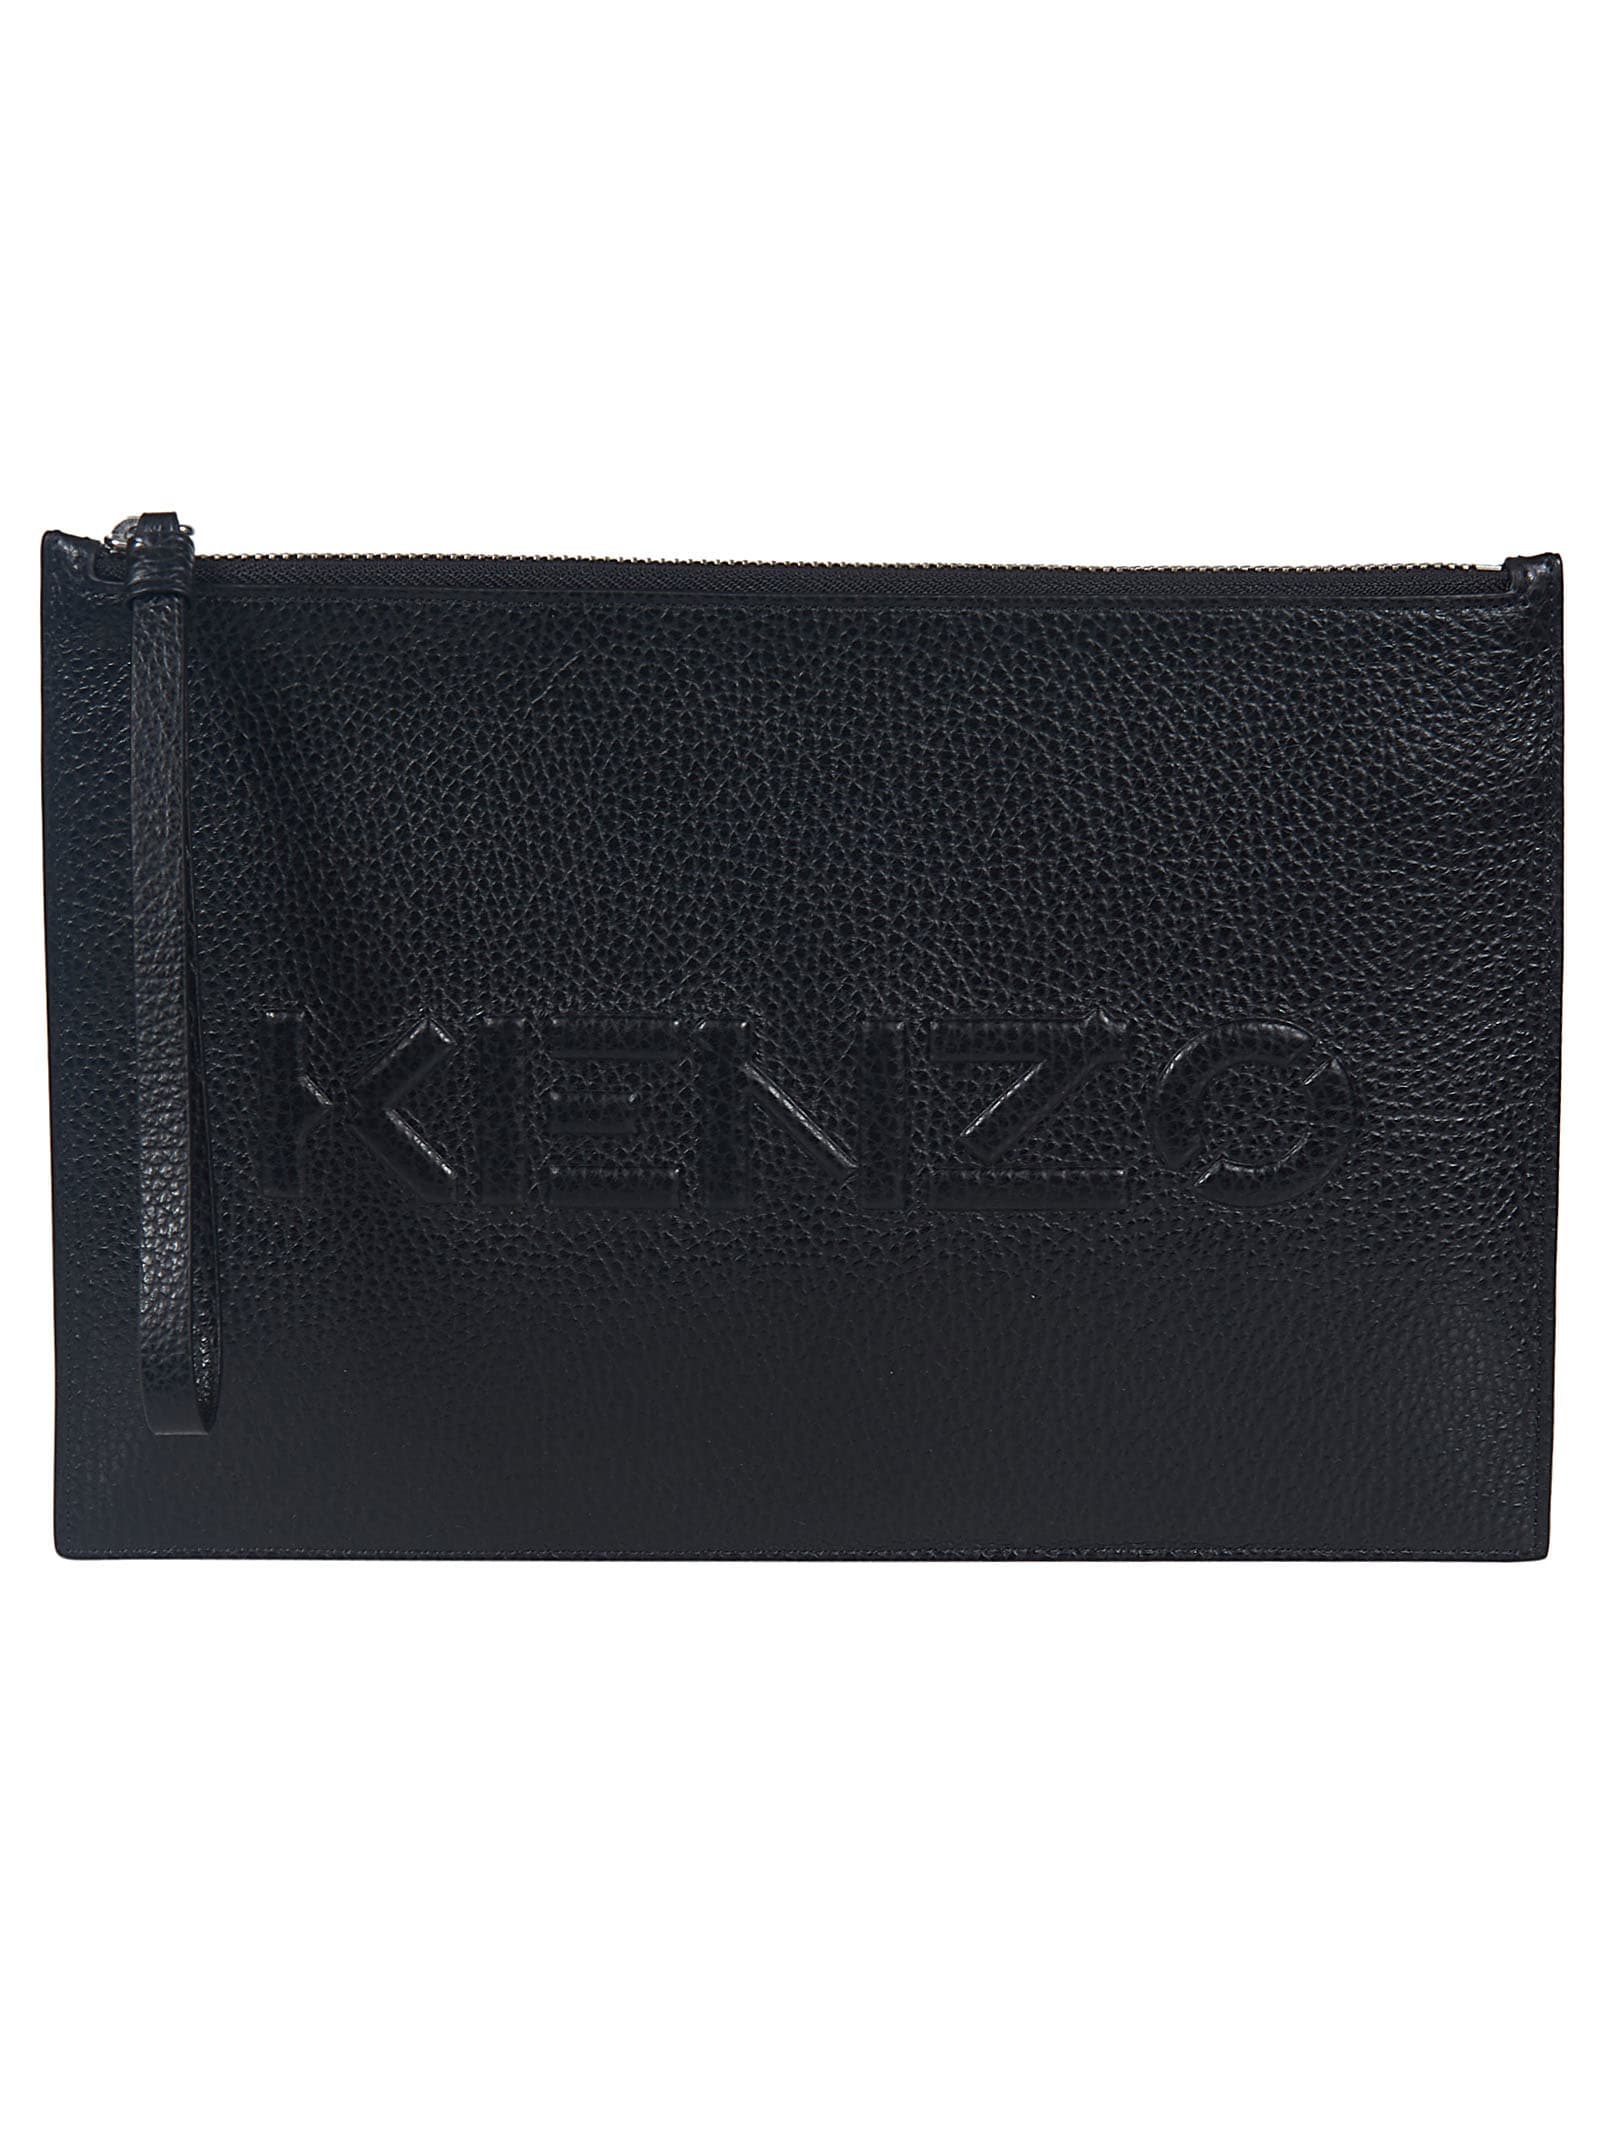 Kenzo Large Logo Stamped Clutch